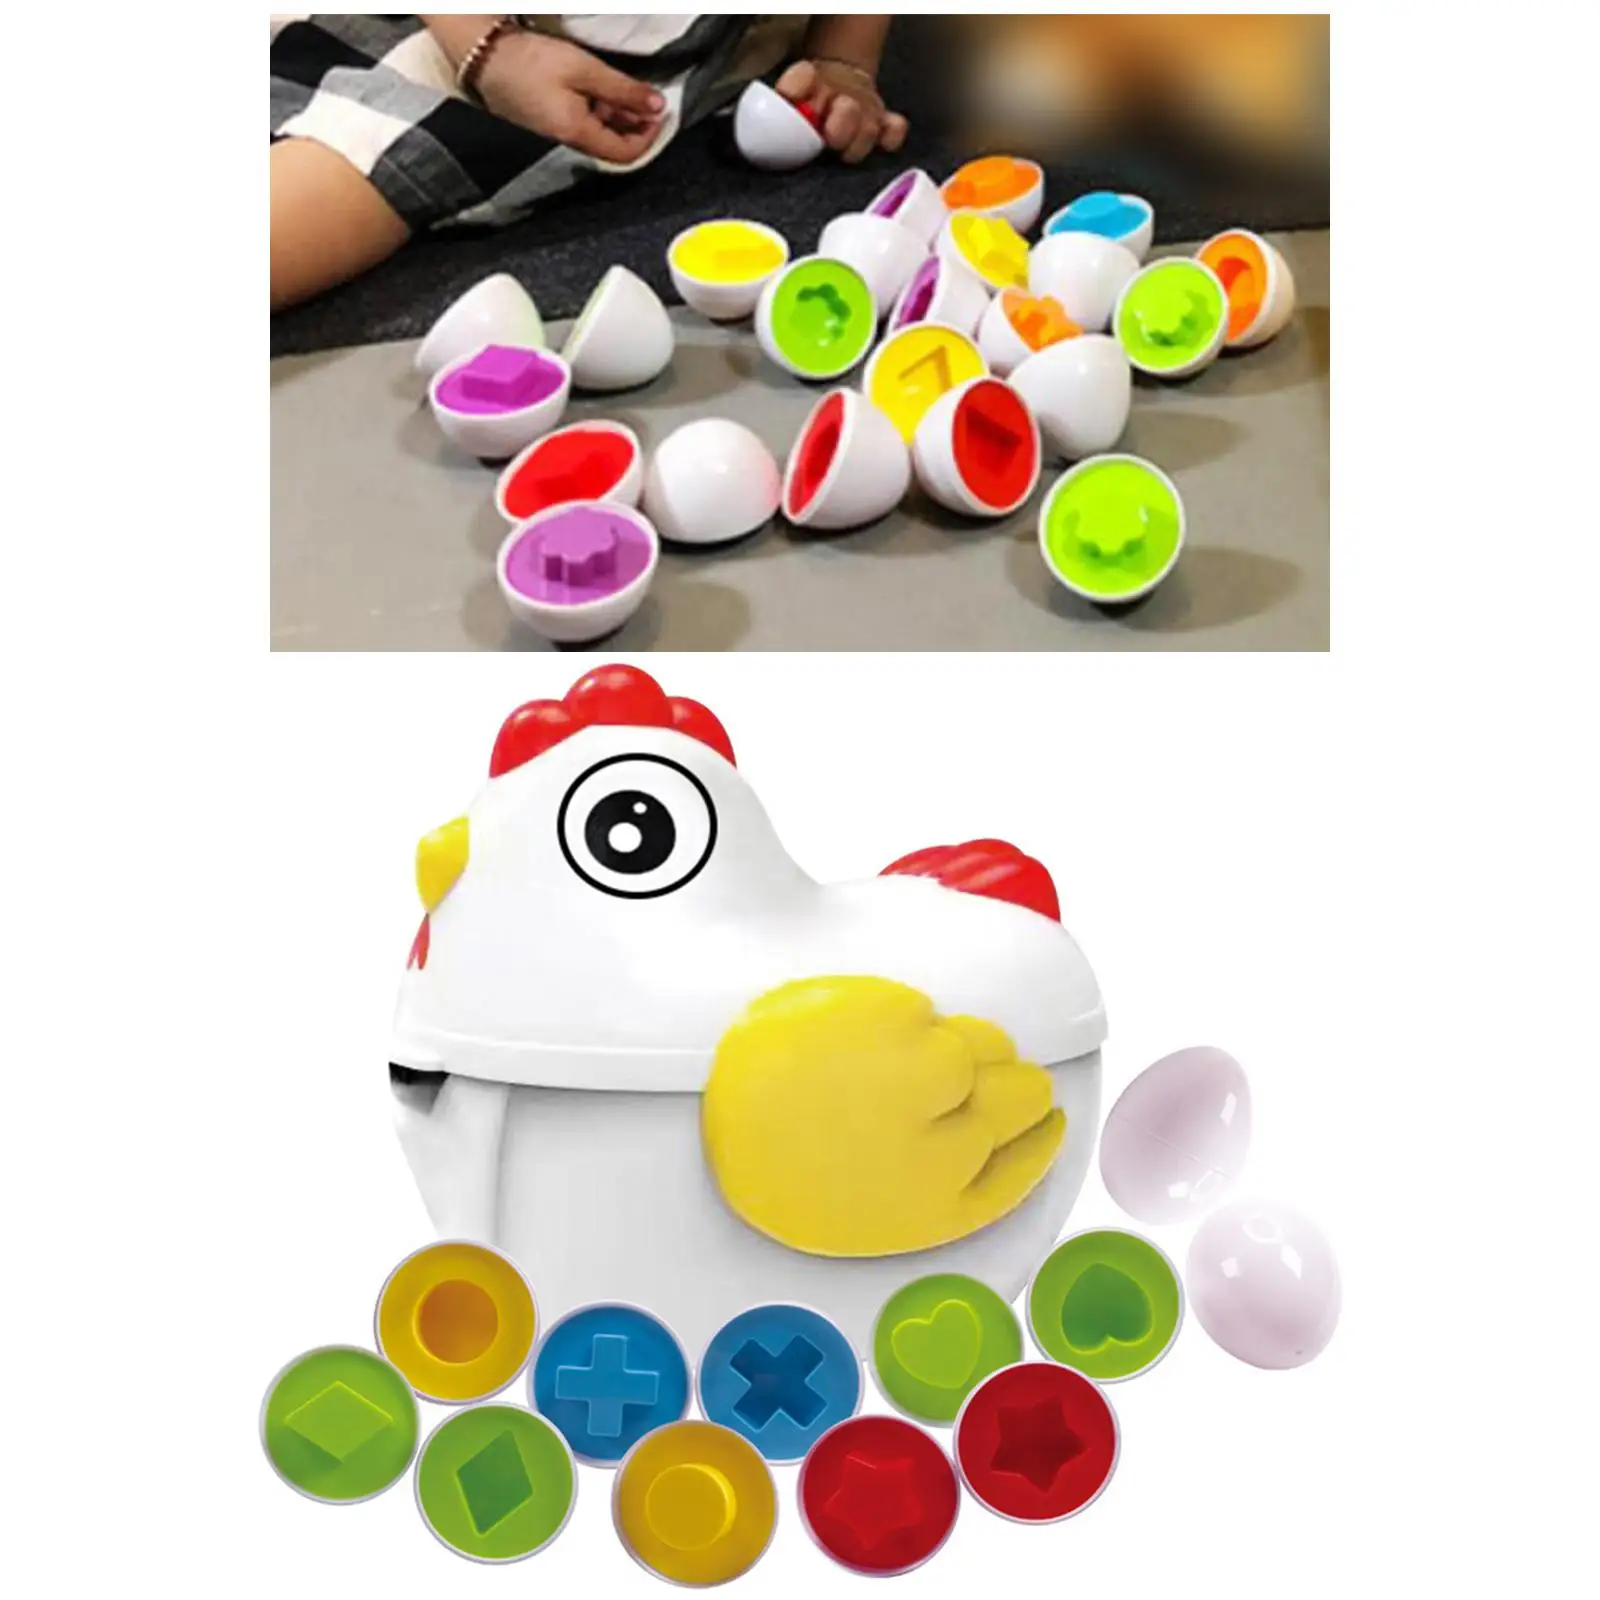 12 Pieces Matching Eggs Toy Chicken Toddler Toys for Puzzle Game Age 1 2 3 4 Year Old